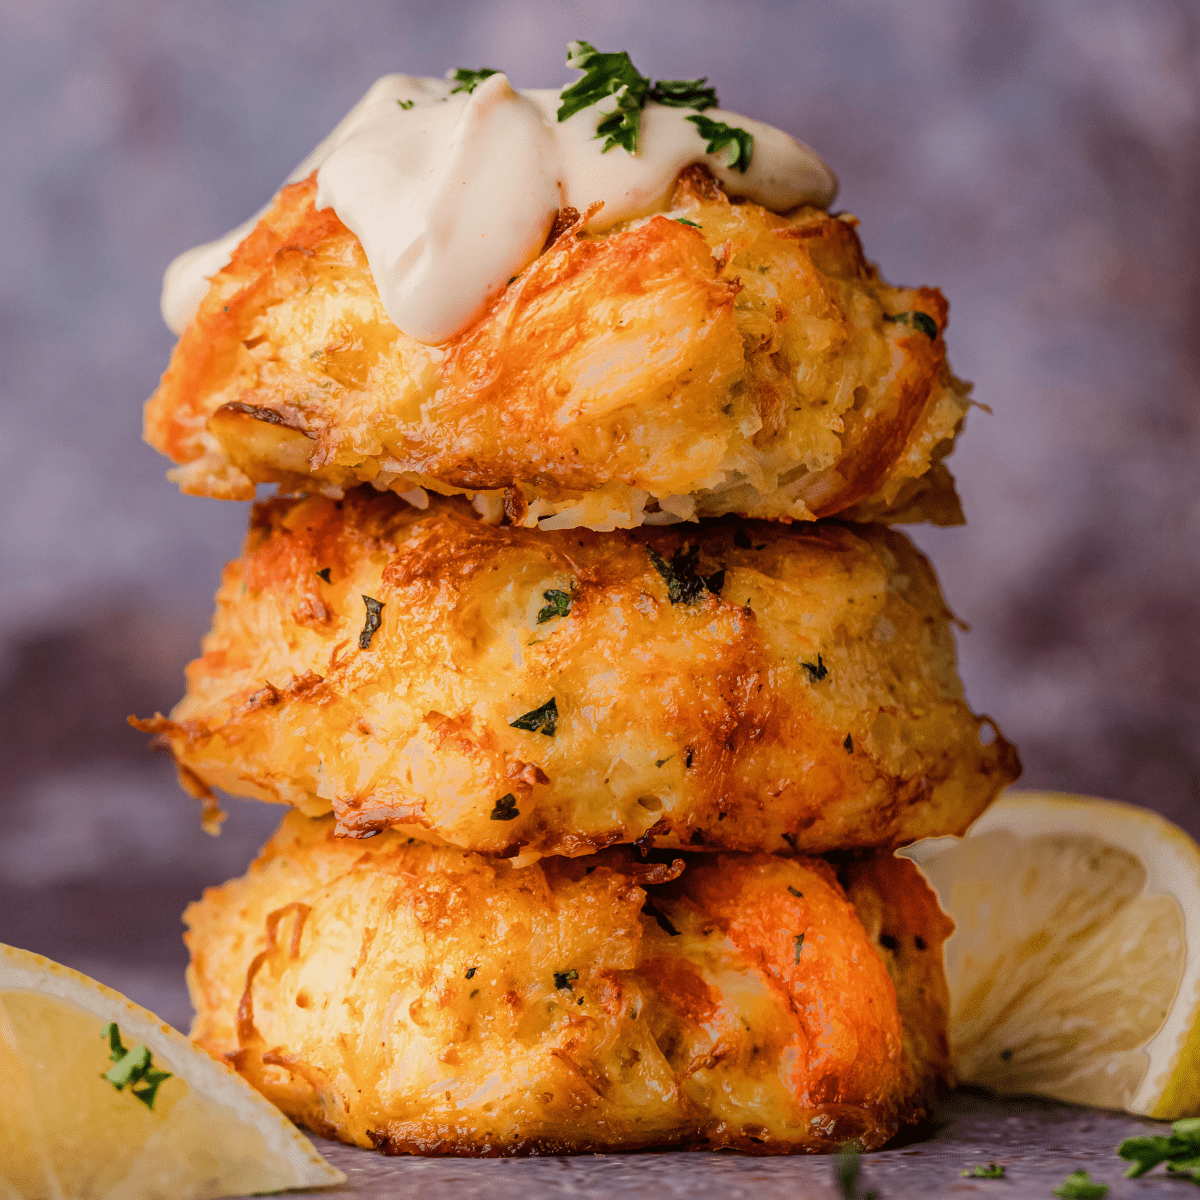 Maryland Crab Cakes with No Filler - Low Carb & Bariatric Friendly Recipe